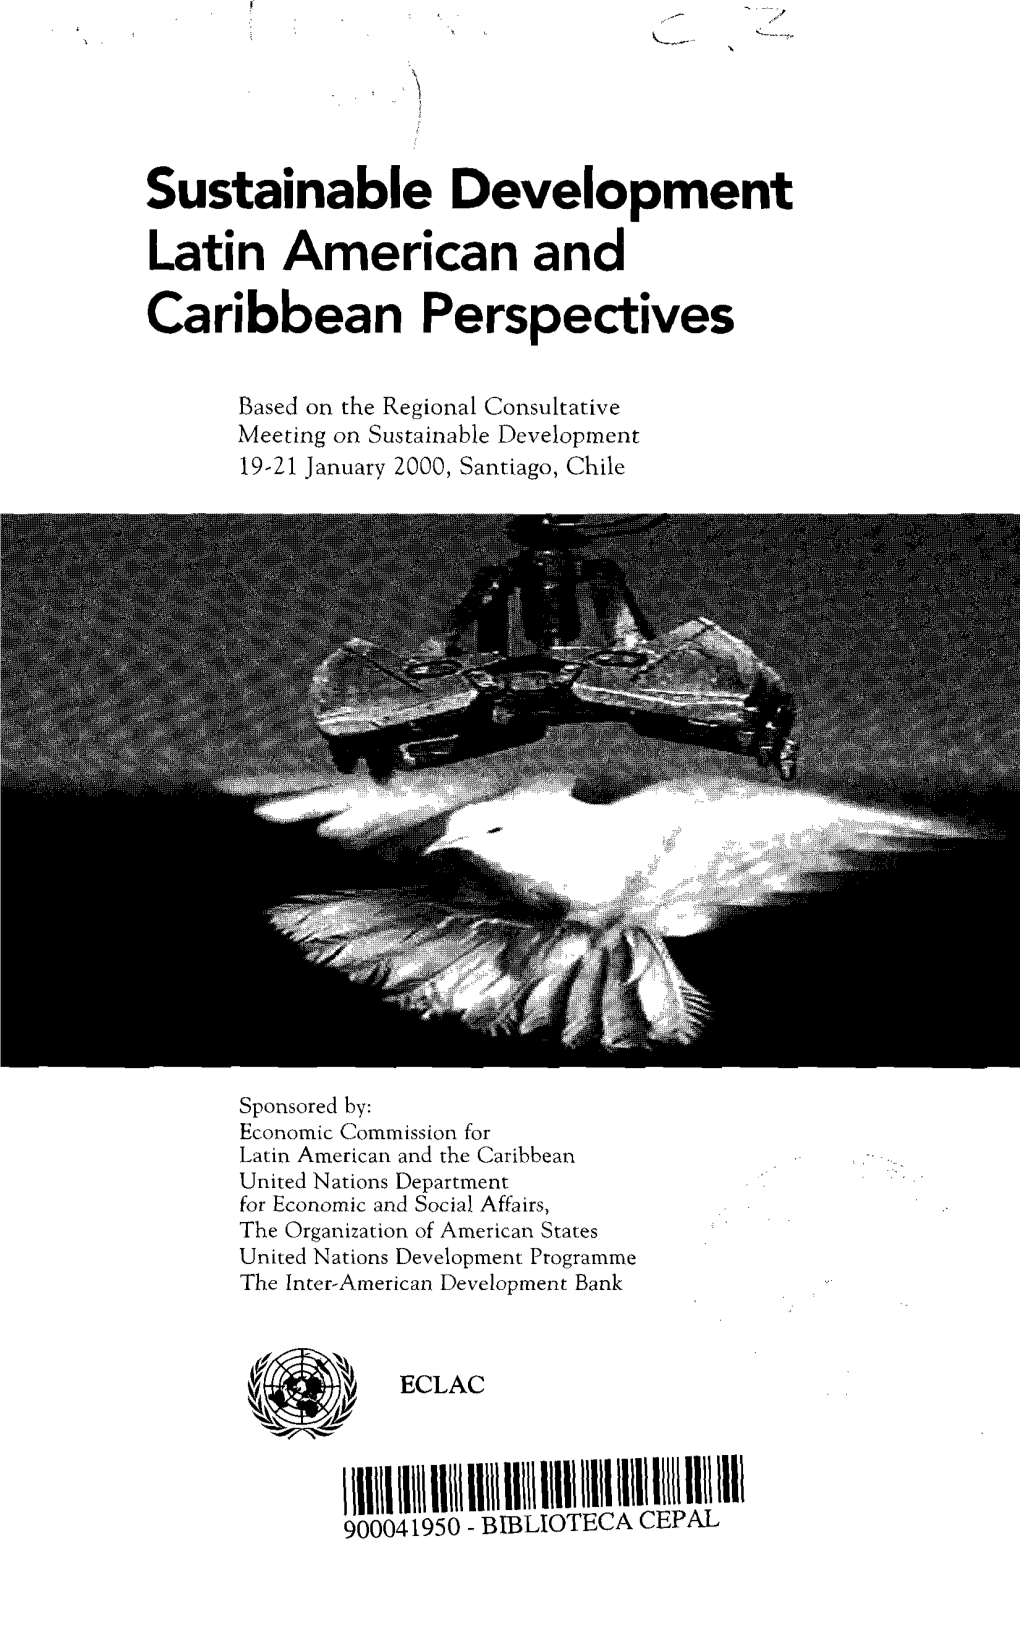 Sustainable Development Latin American and Caribbean Perspectives